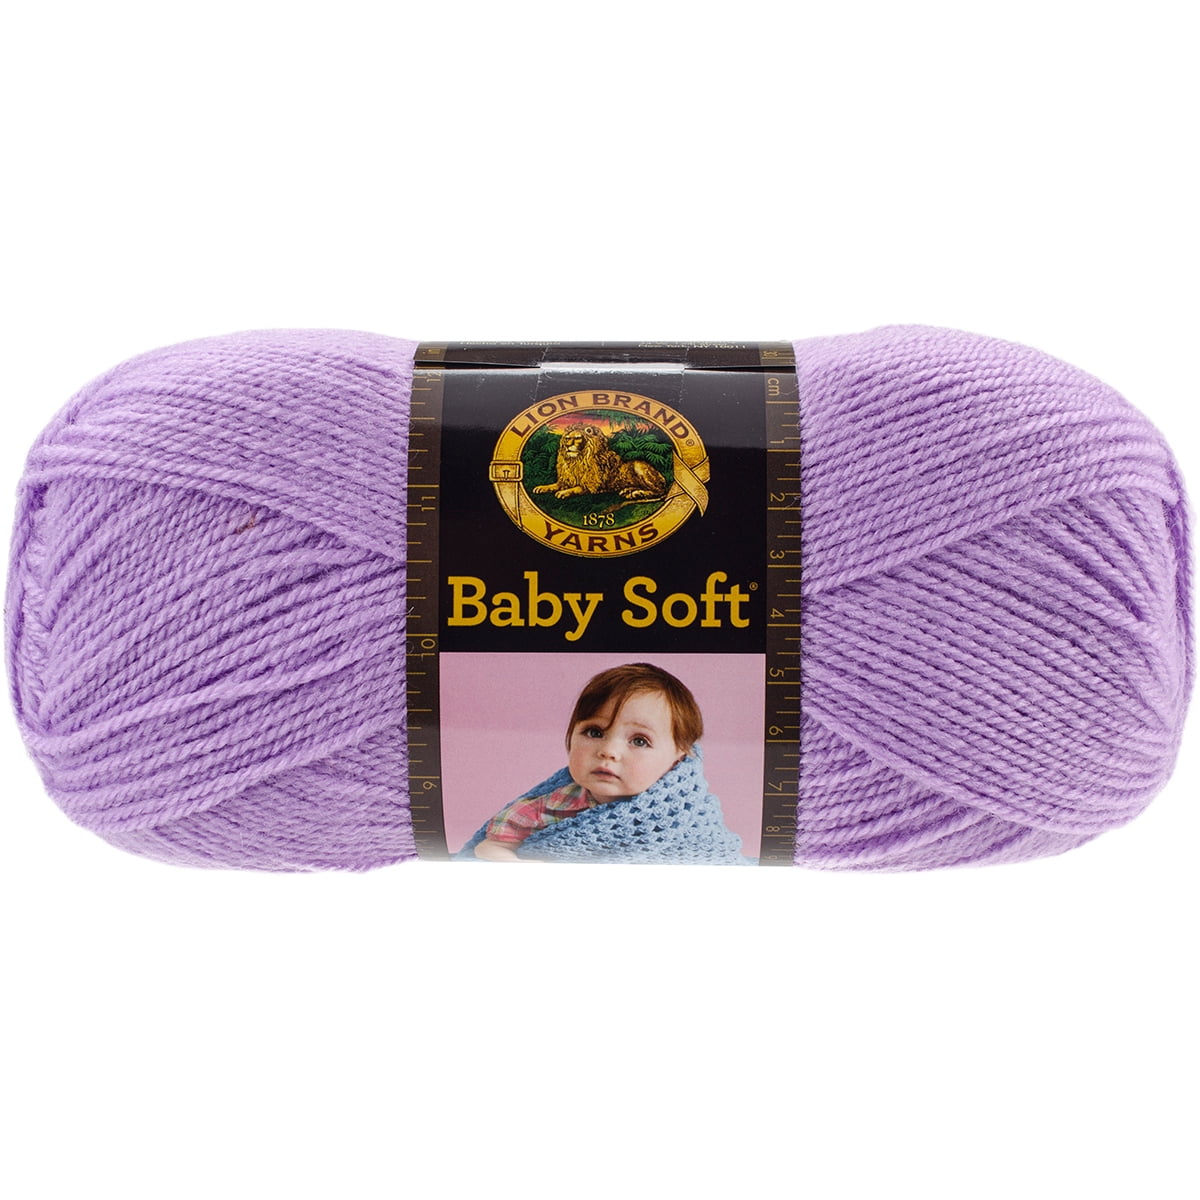 Lion Brand Baby Soft Yarn Twinkle Print Multipack of 6